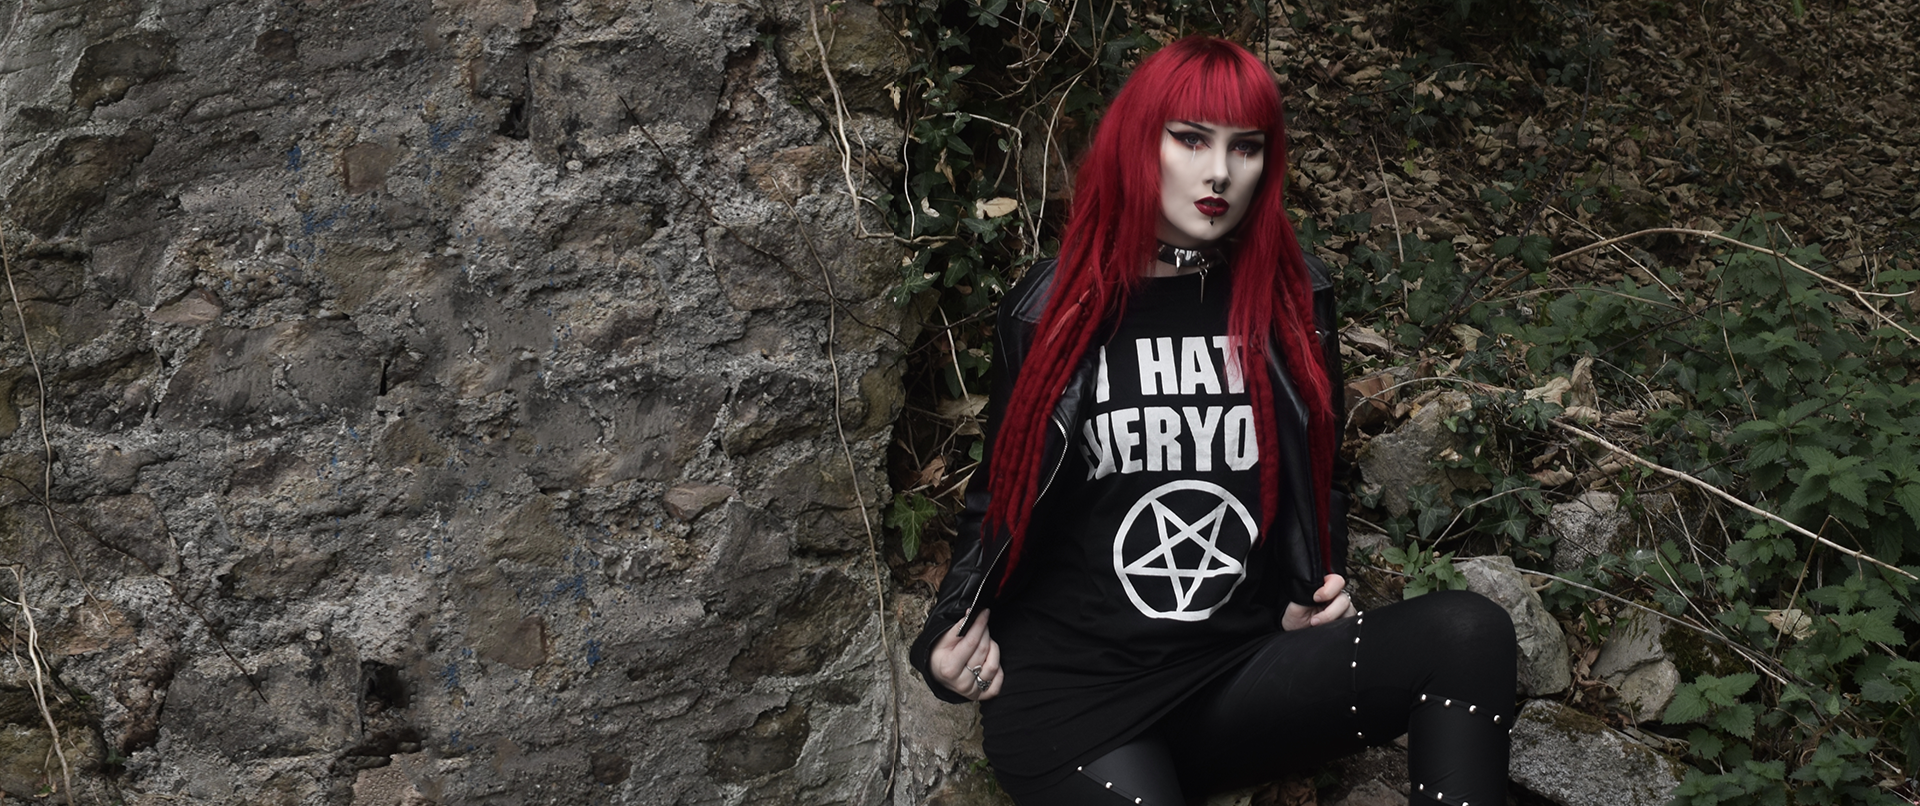 Girl sitting down posing as she shows off Belial Clothing Co's "I hate everyone" Tee shirt